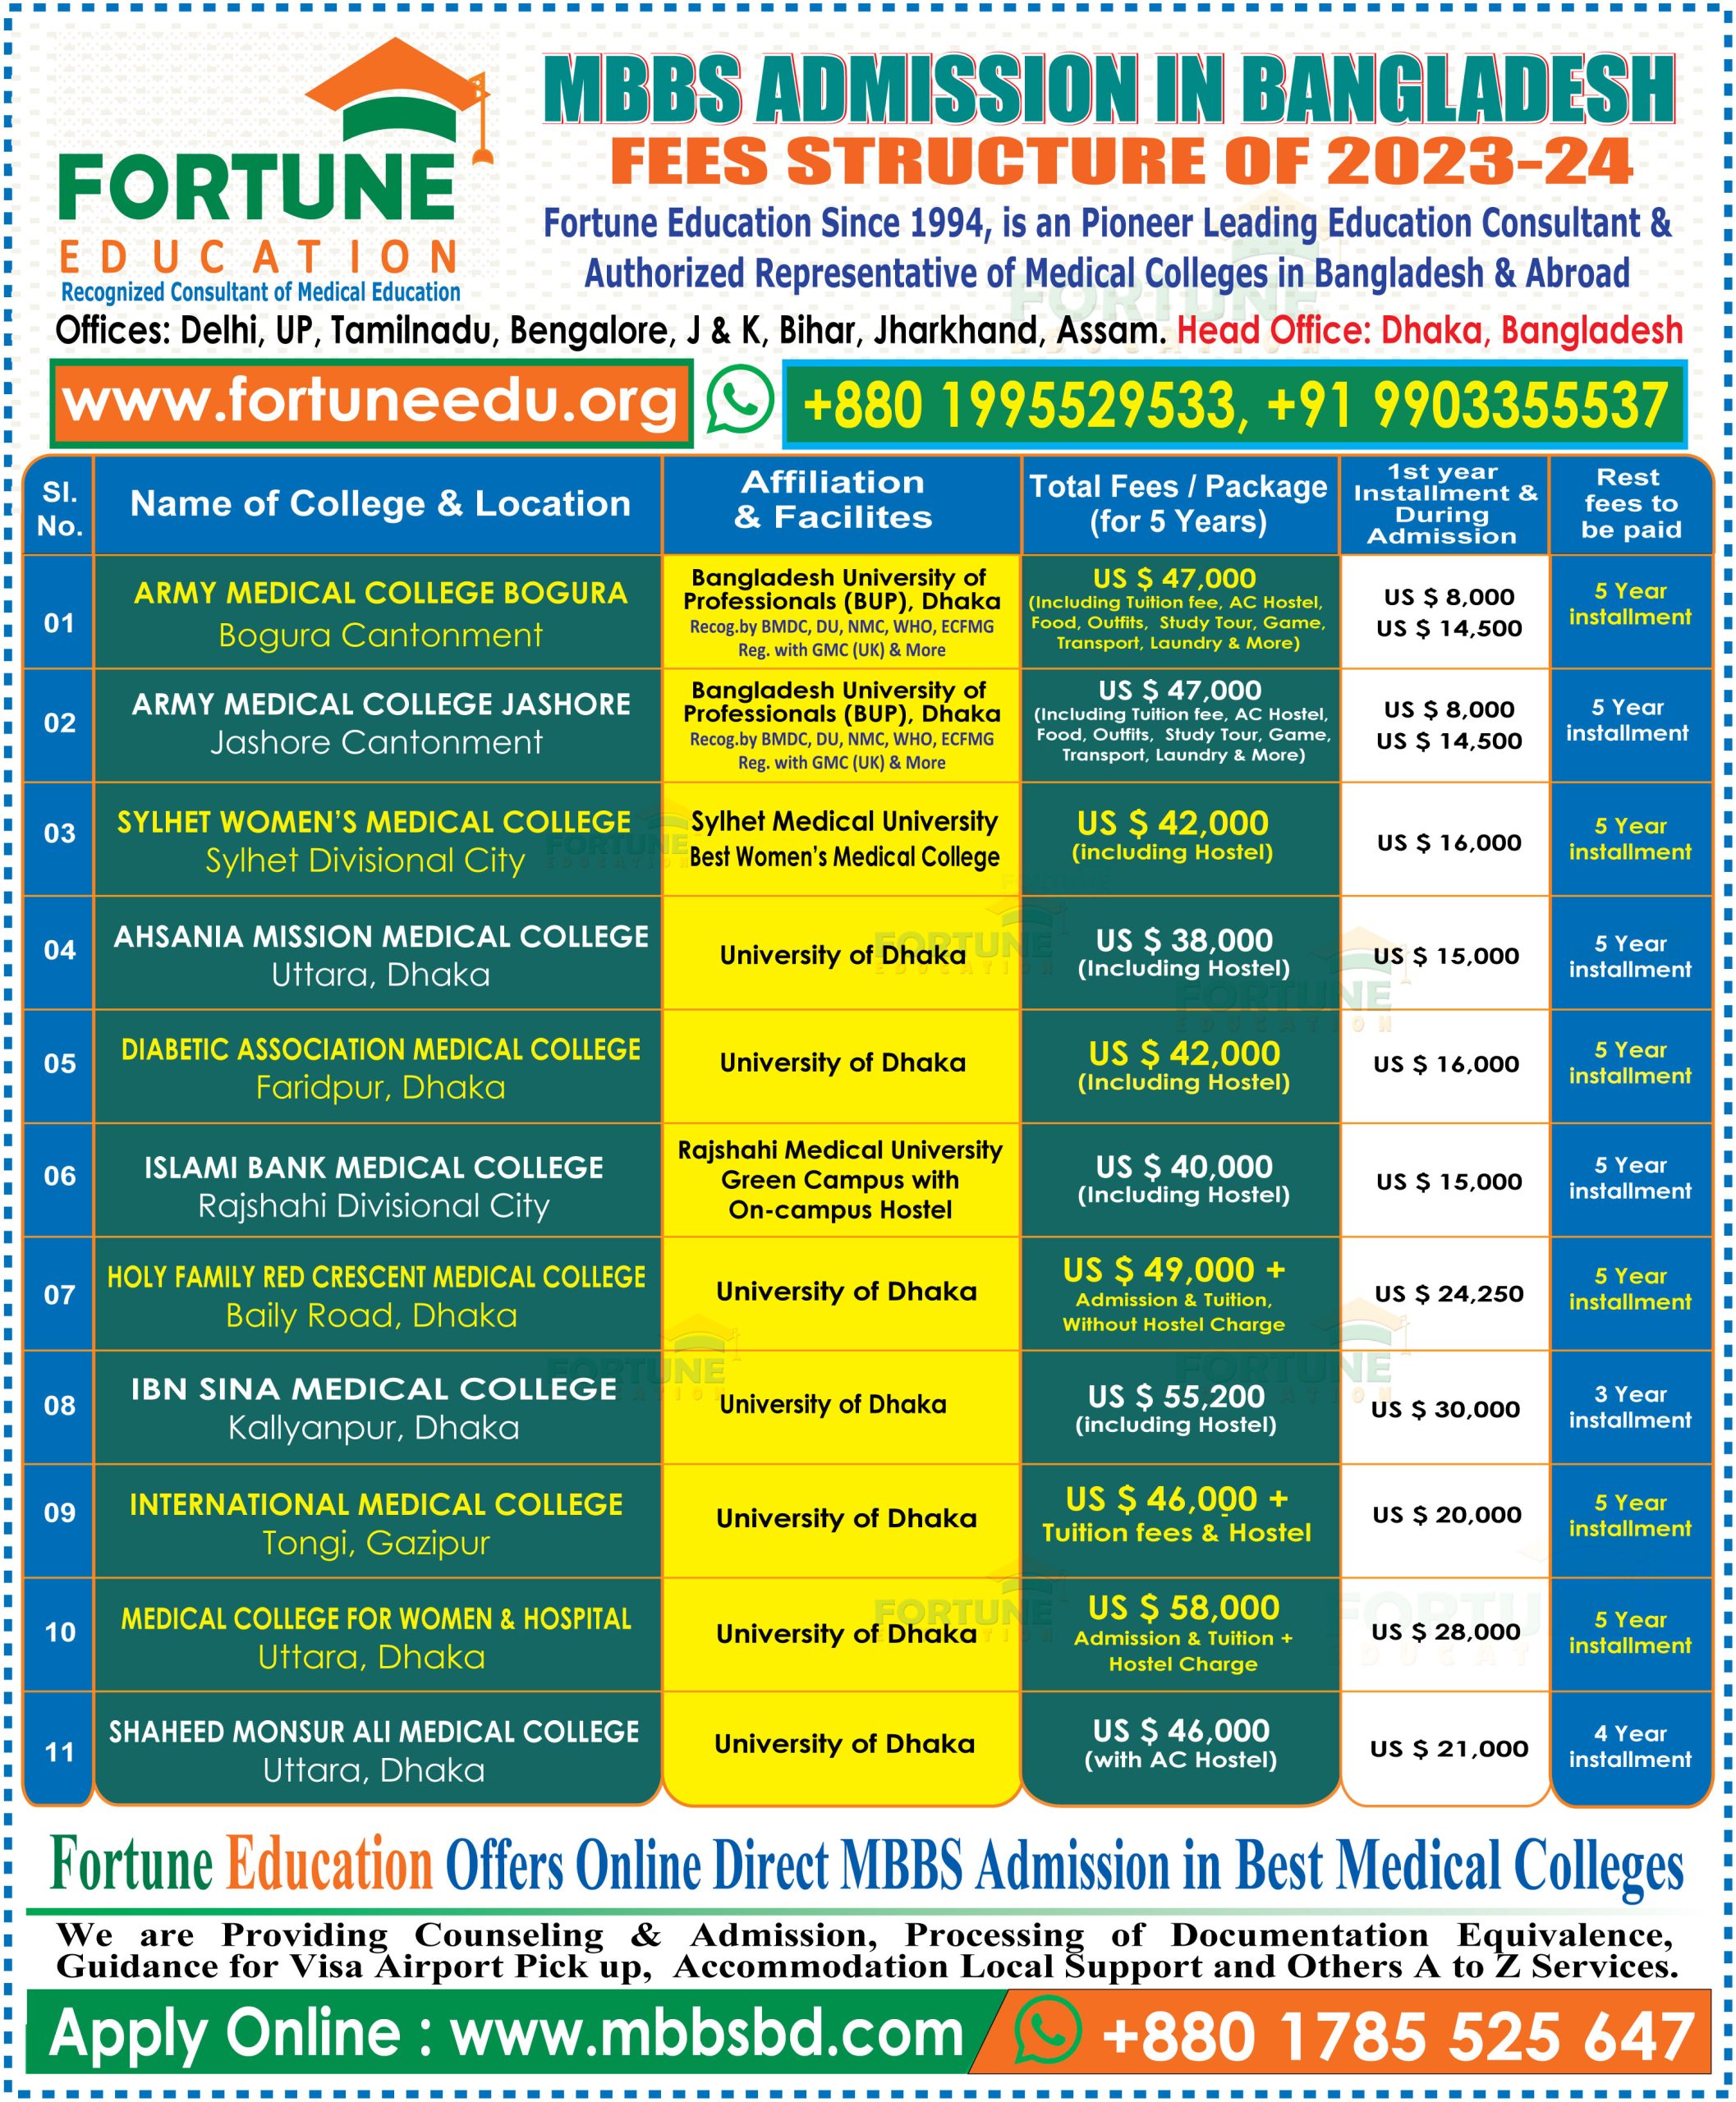 Fortune Education offers Direct MBBS Admission without Entrance